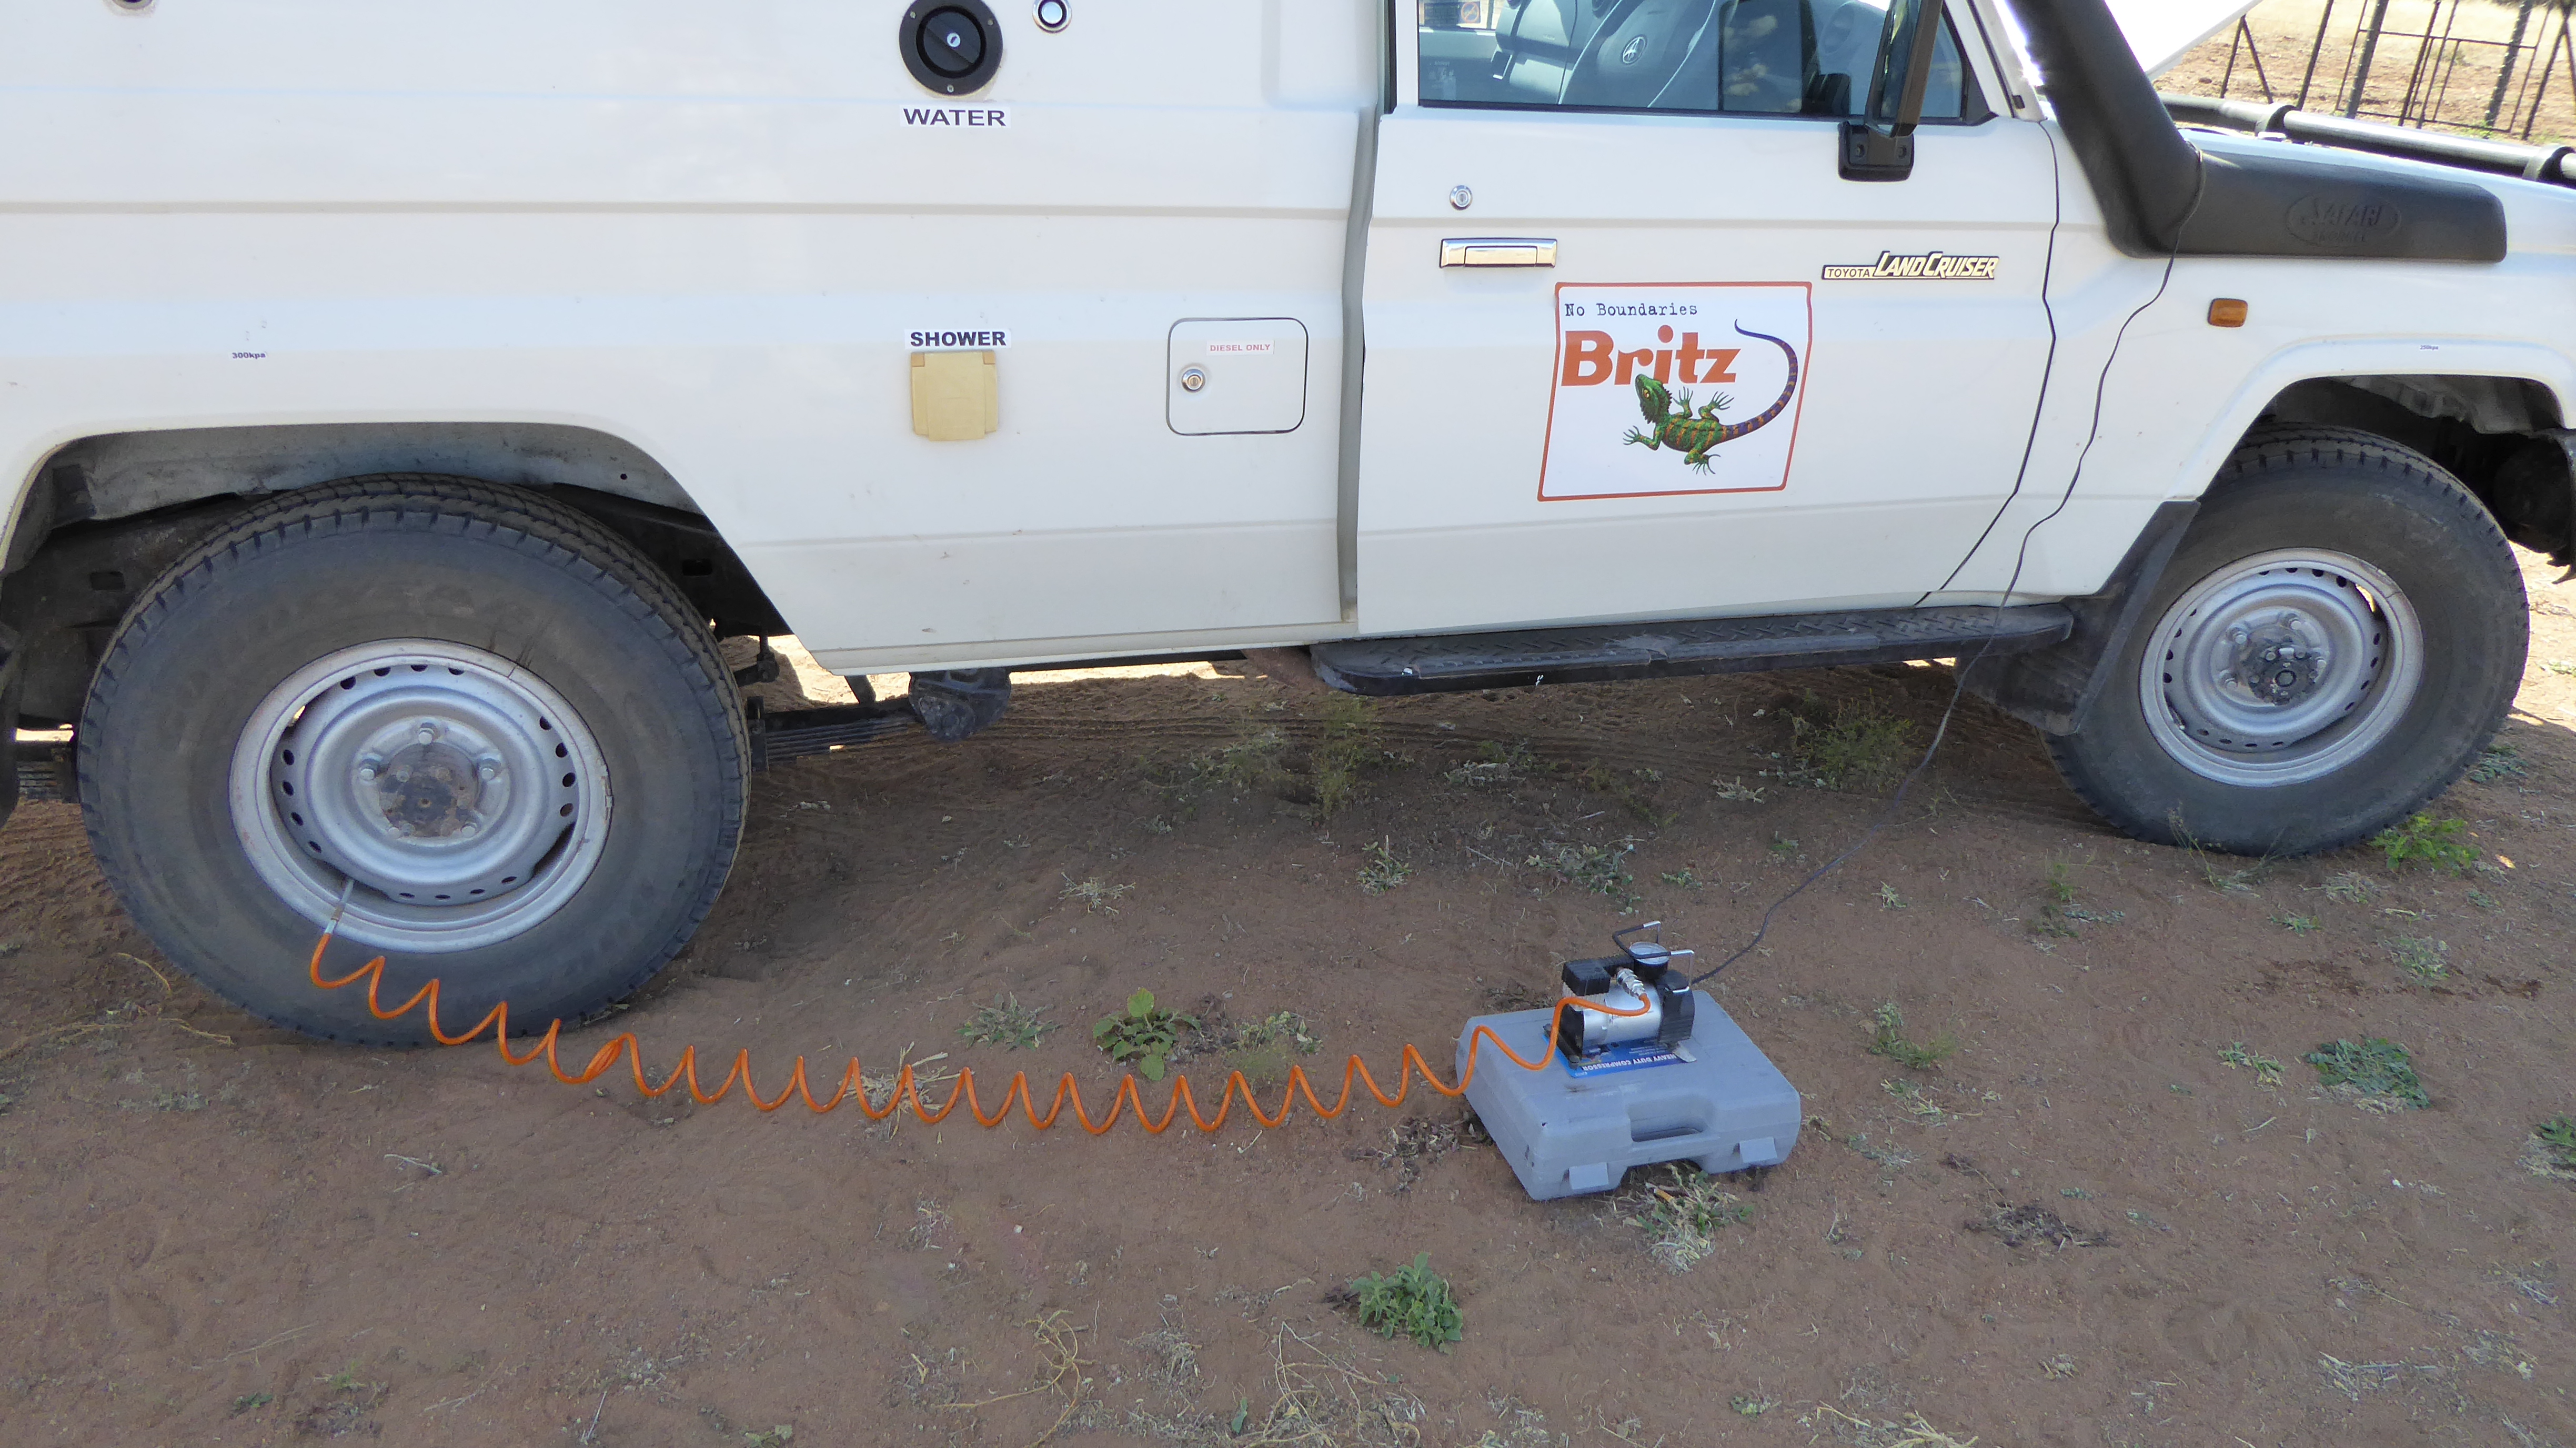 Bush camping equipped vehicles usually come with these pumps. Make sure you get one, and that it works before heading out. 